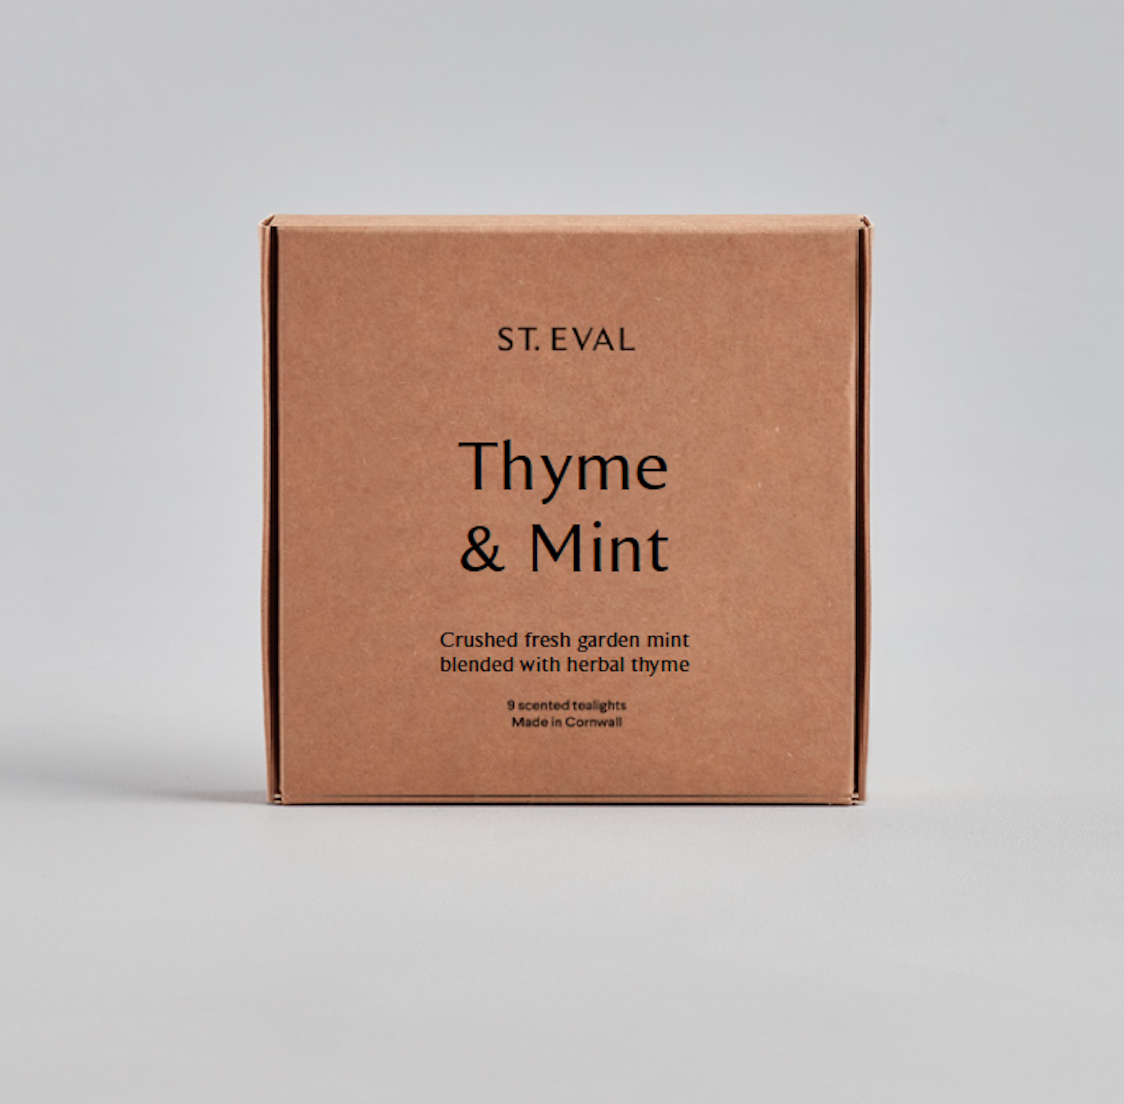 Thyme & Mint Scented Tealights